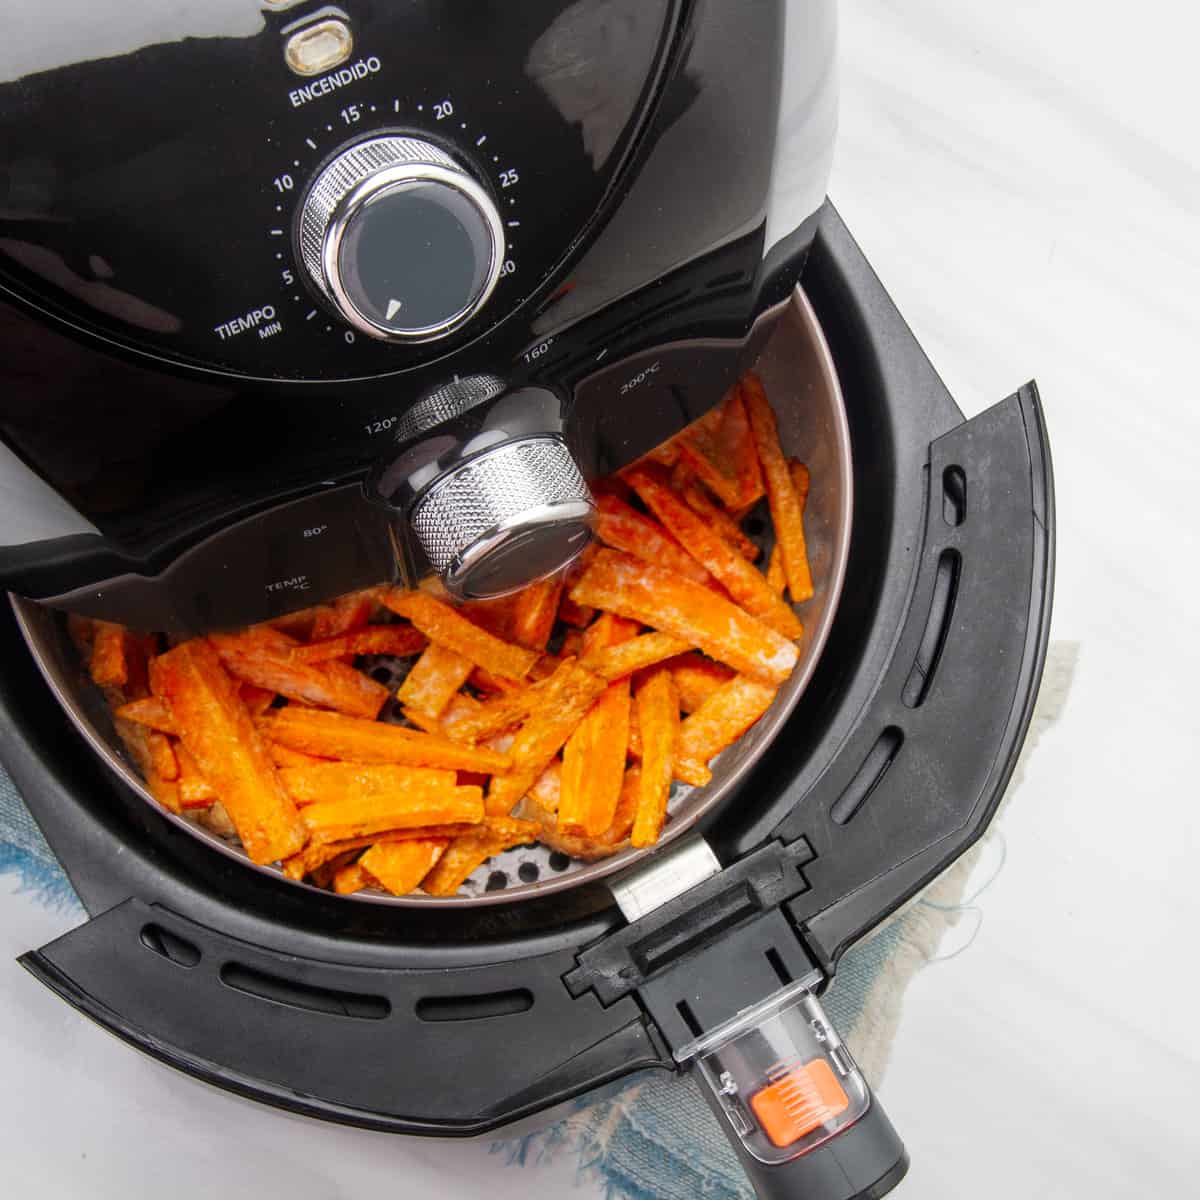 Carrot fries cooking in instant pot